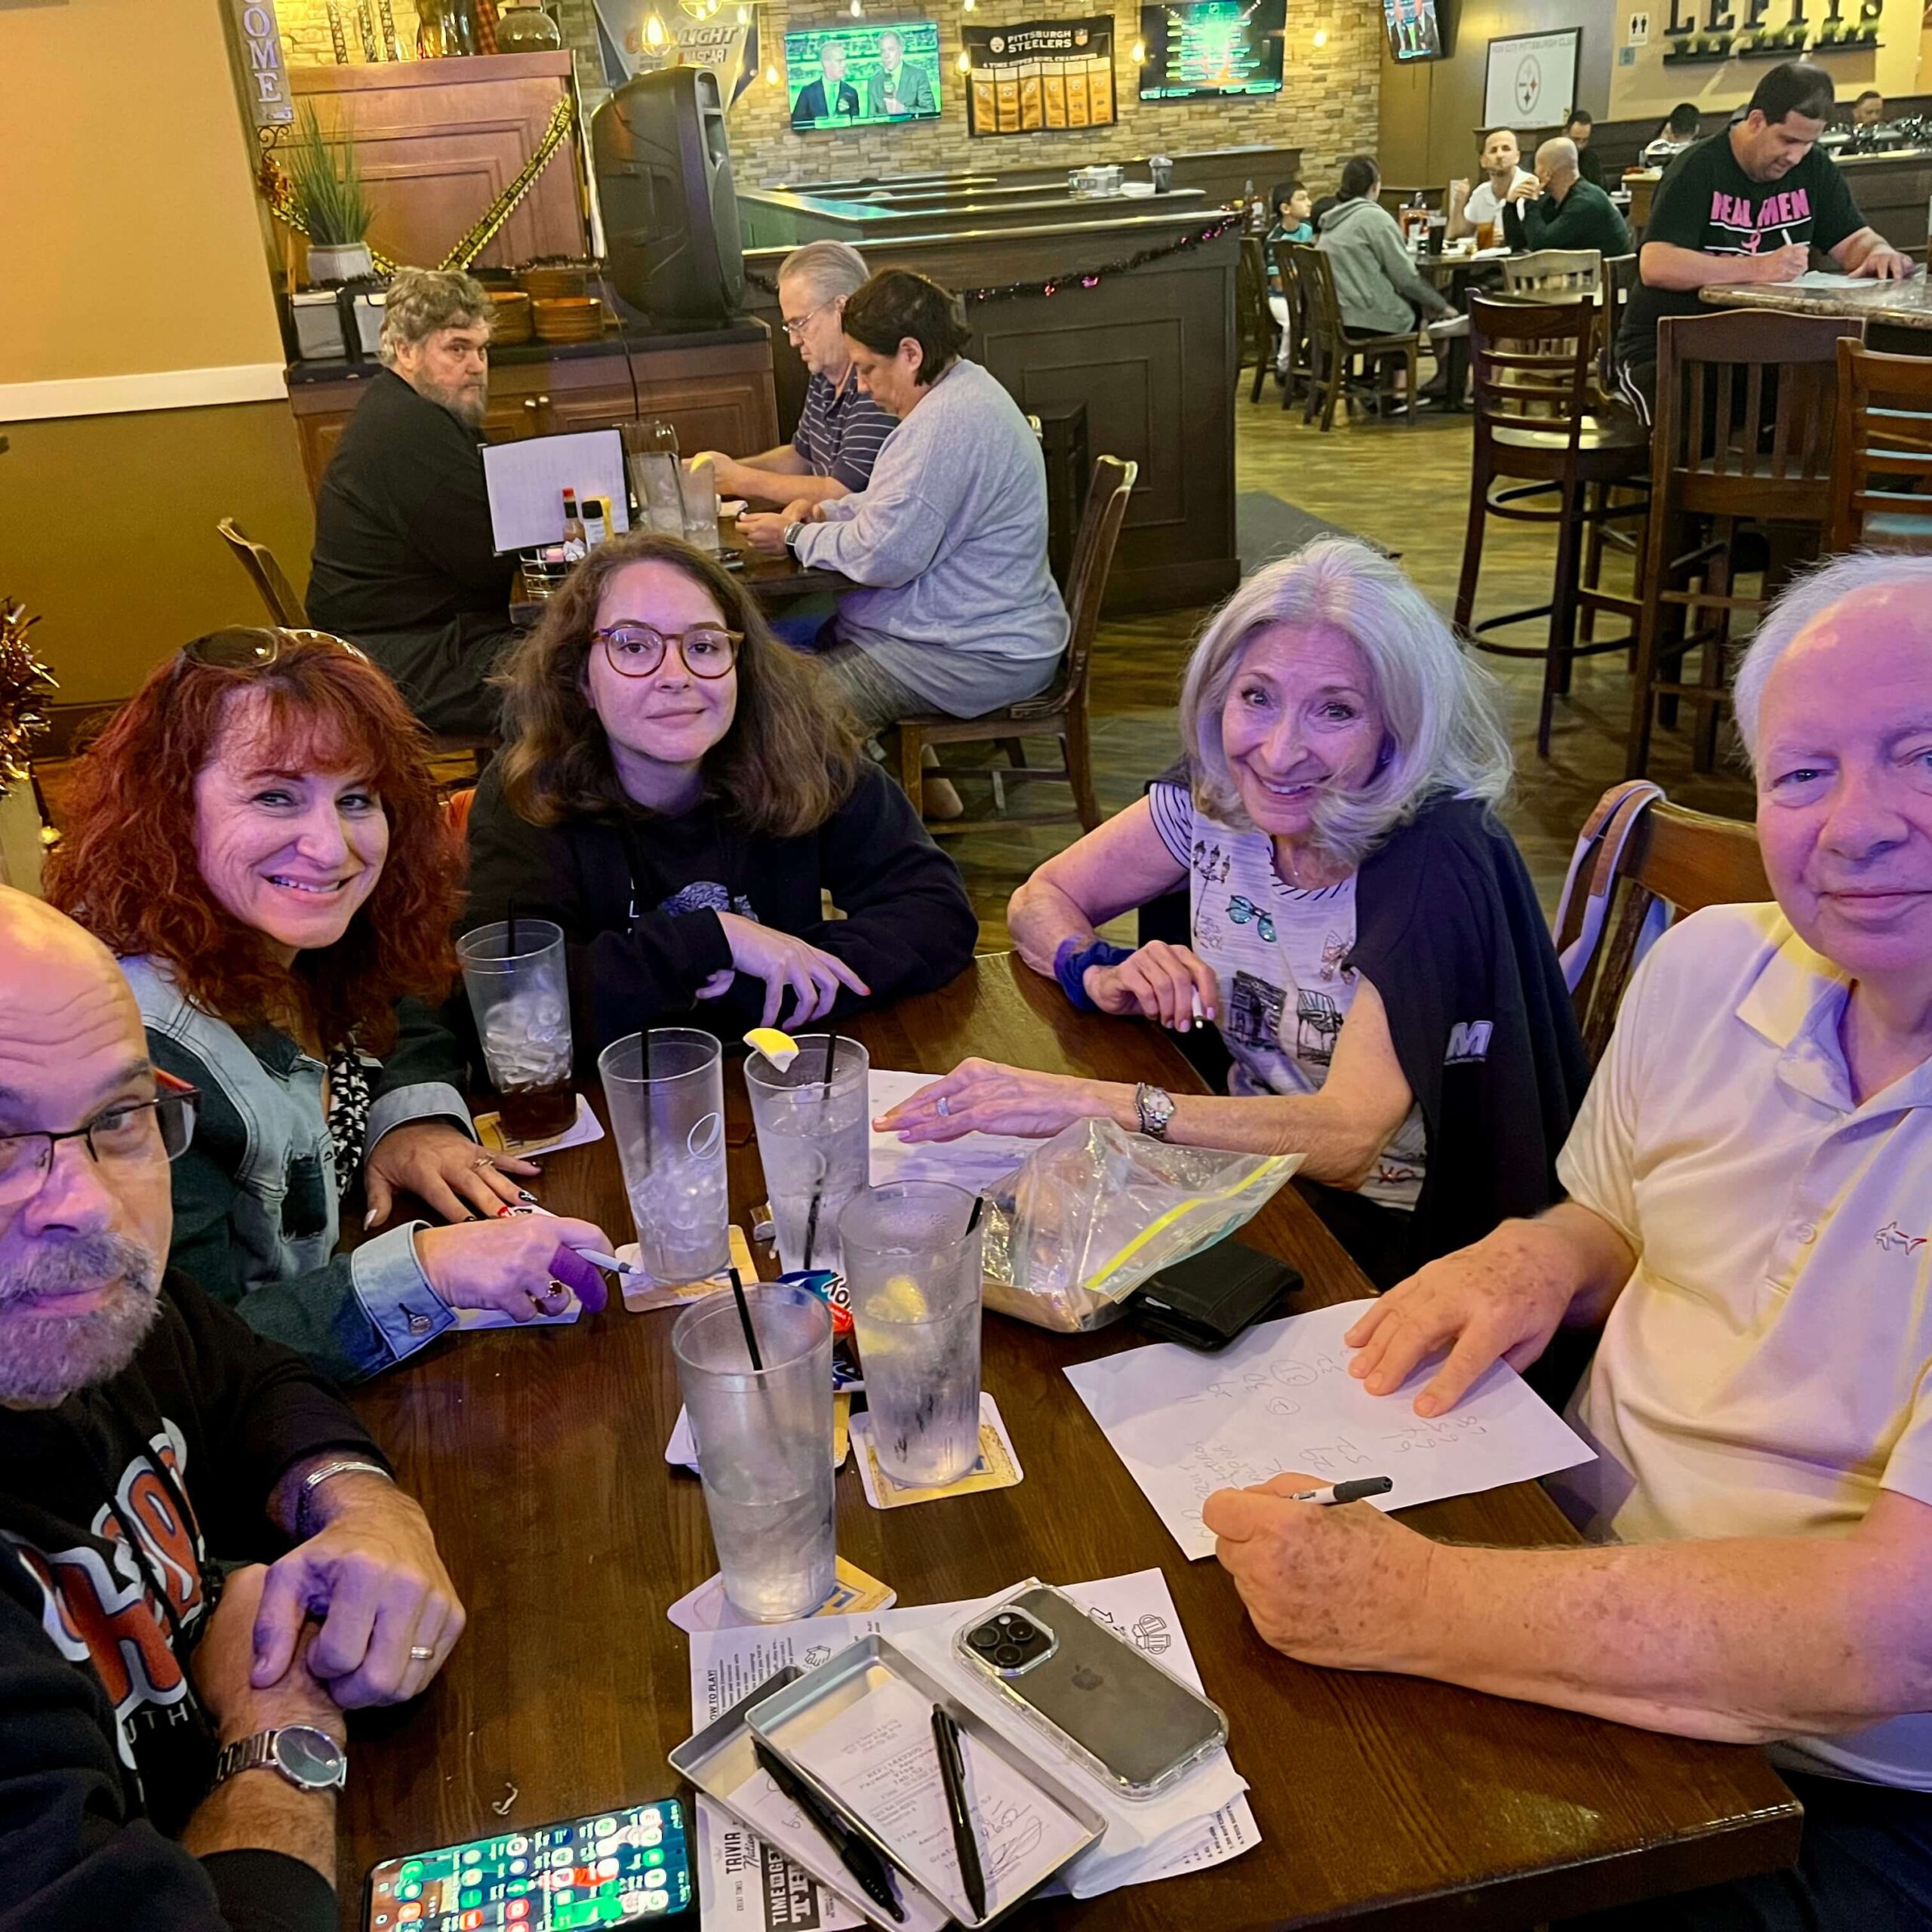 Lefty's Tavern & Grille Coral Springs FL 33076 trivia night 2